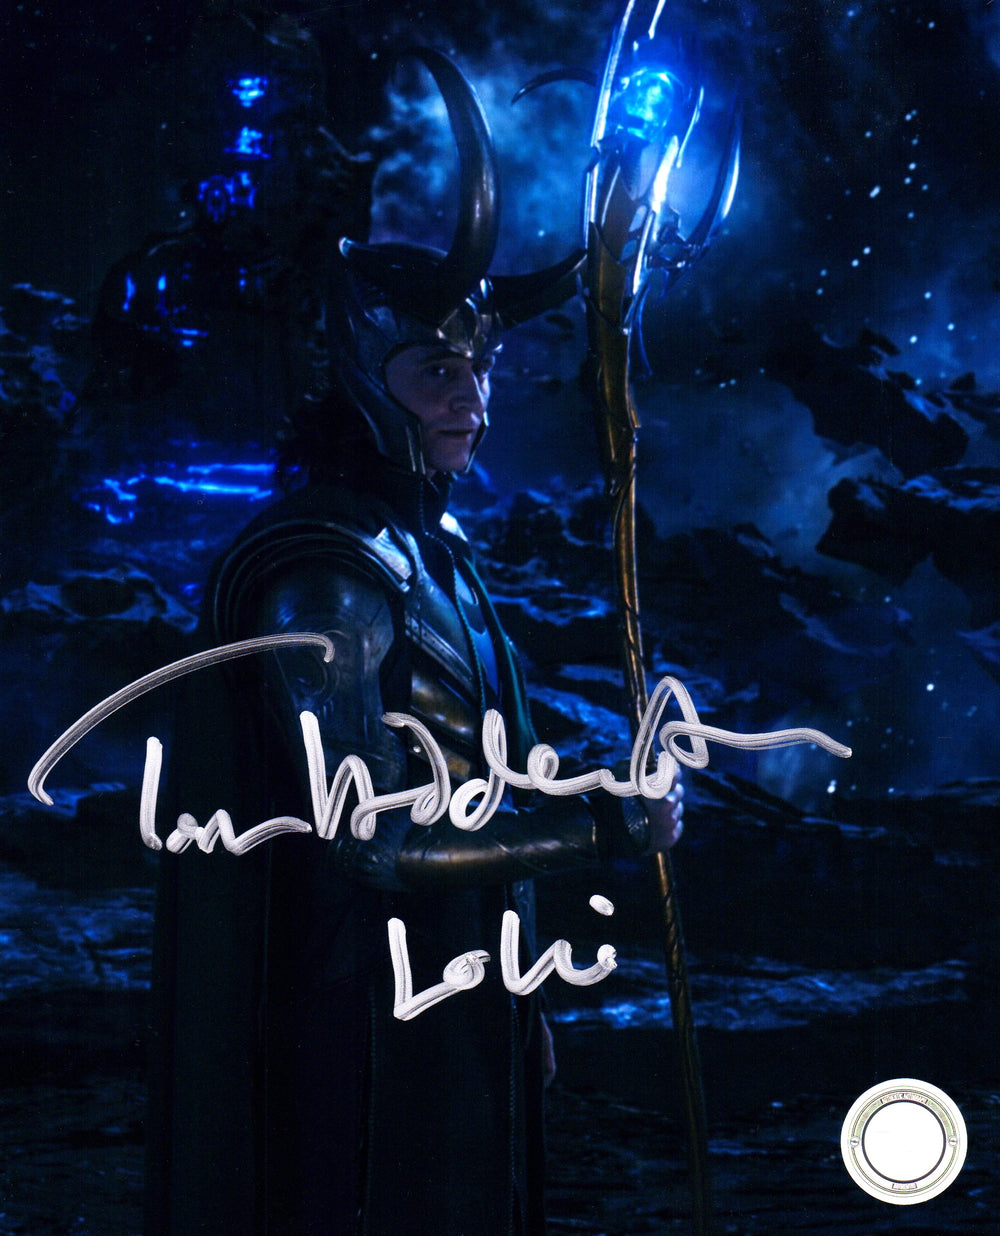 Tom Hiddleston as Loki in The Avengers 8x10 (SWAU) Photo Signed with Character Name